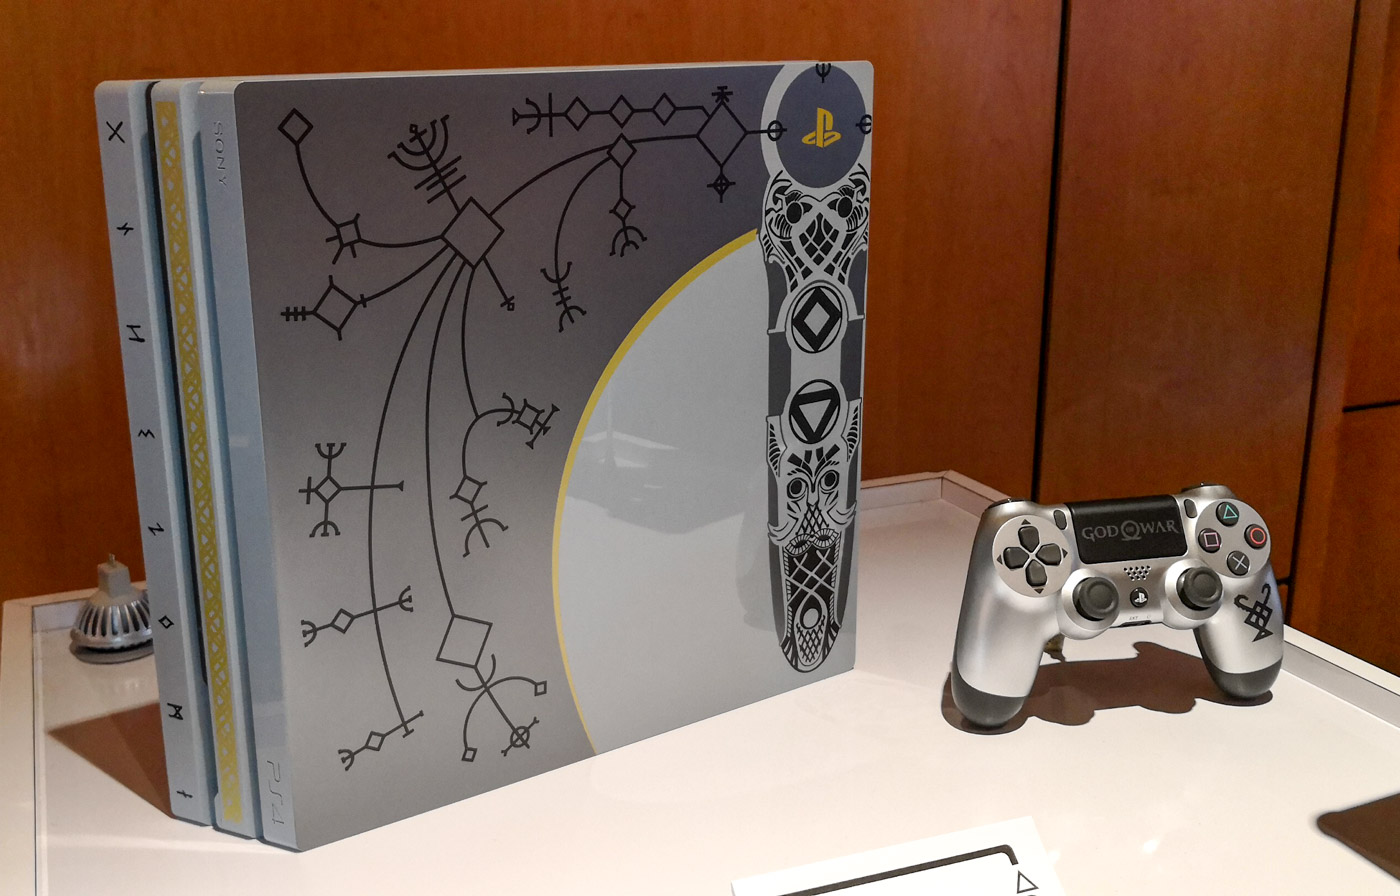 ps4 pro gow edition